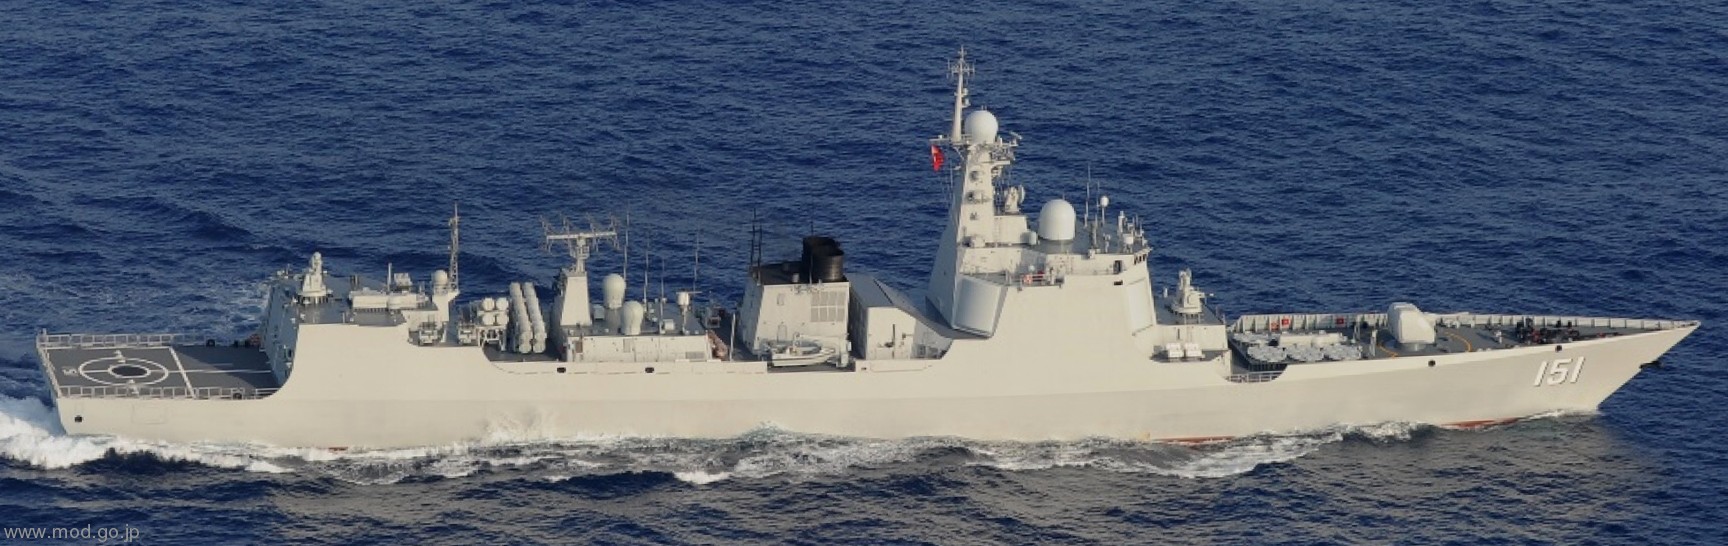 ddg-151 plans zhengzhou type 052c class guided missile destroyer china people's liberation army navy 03